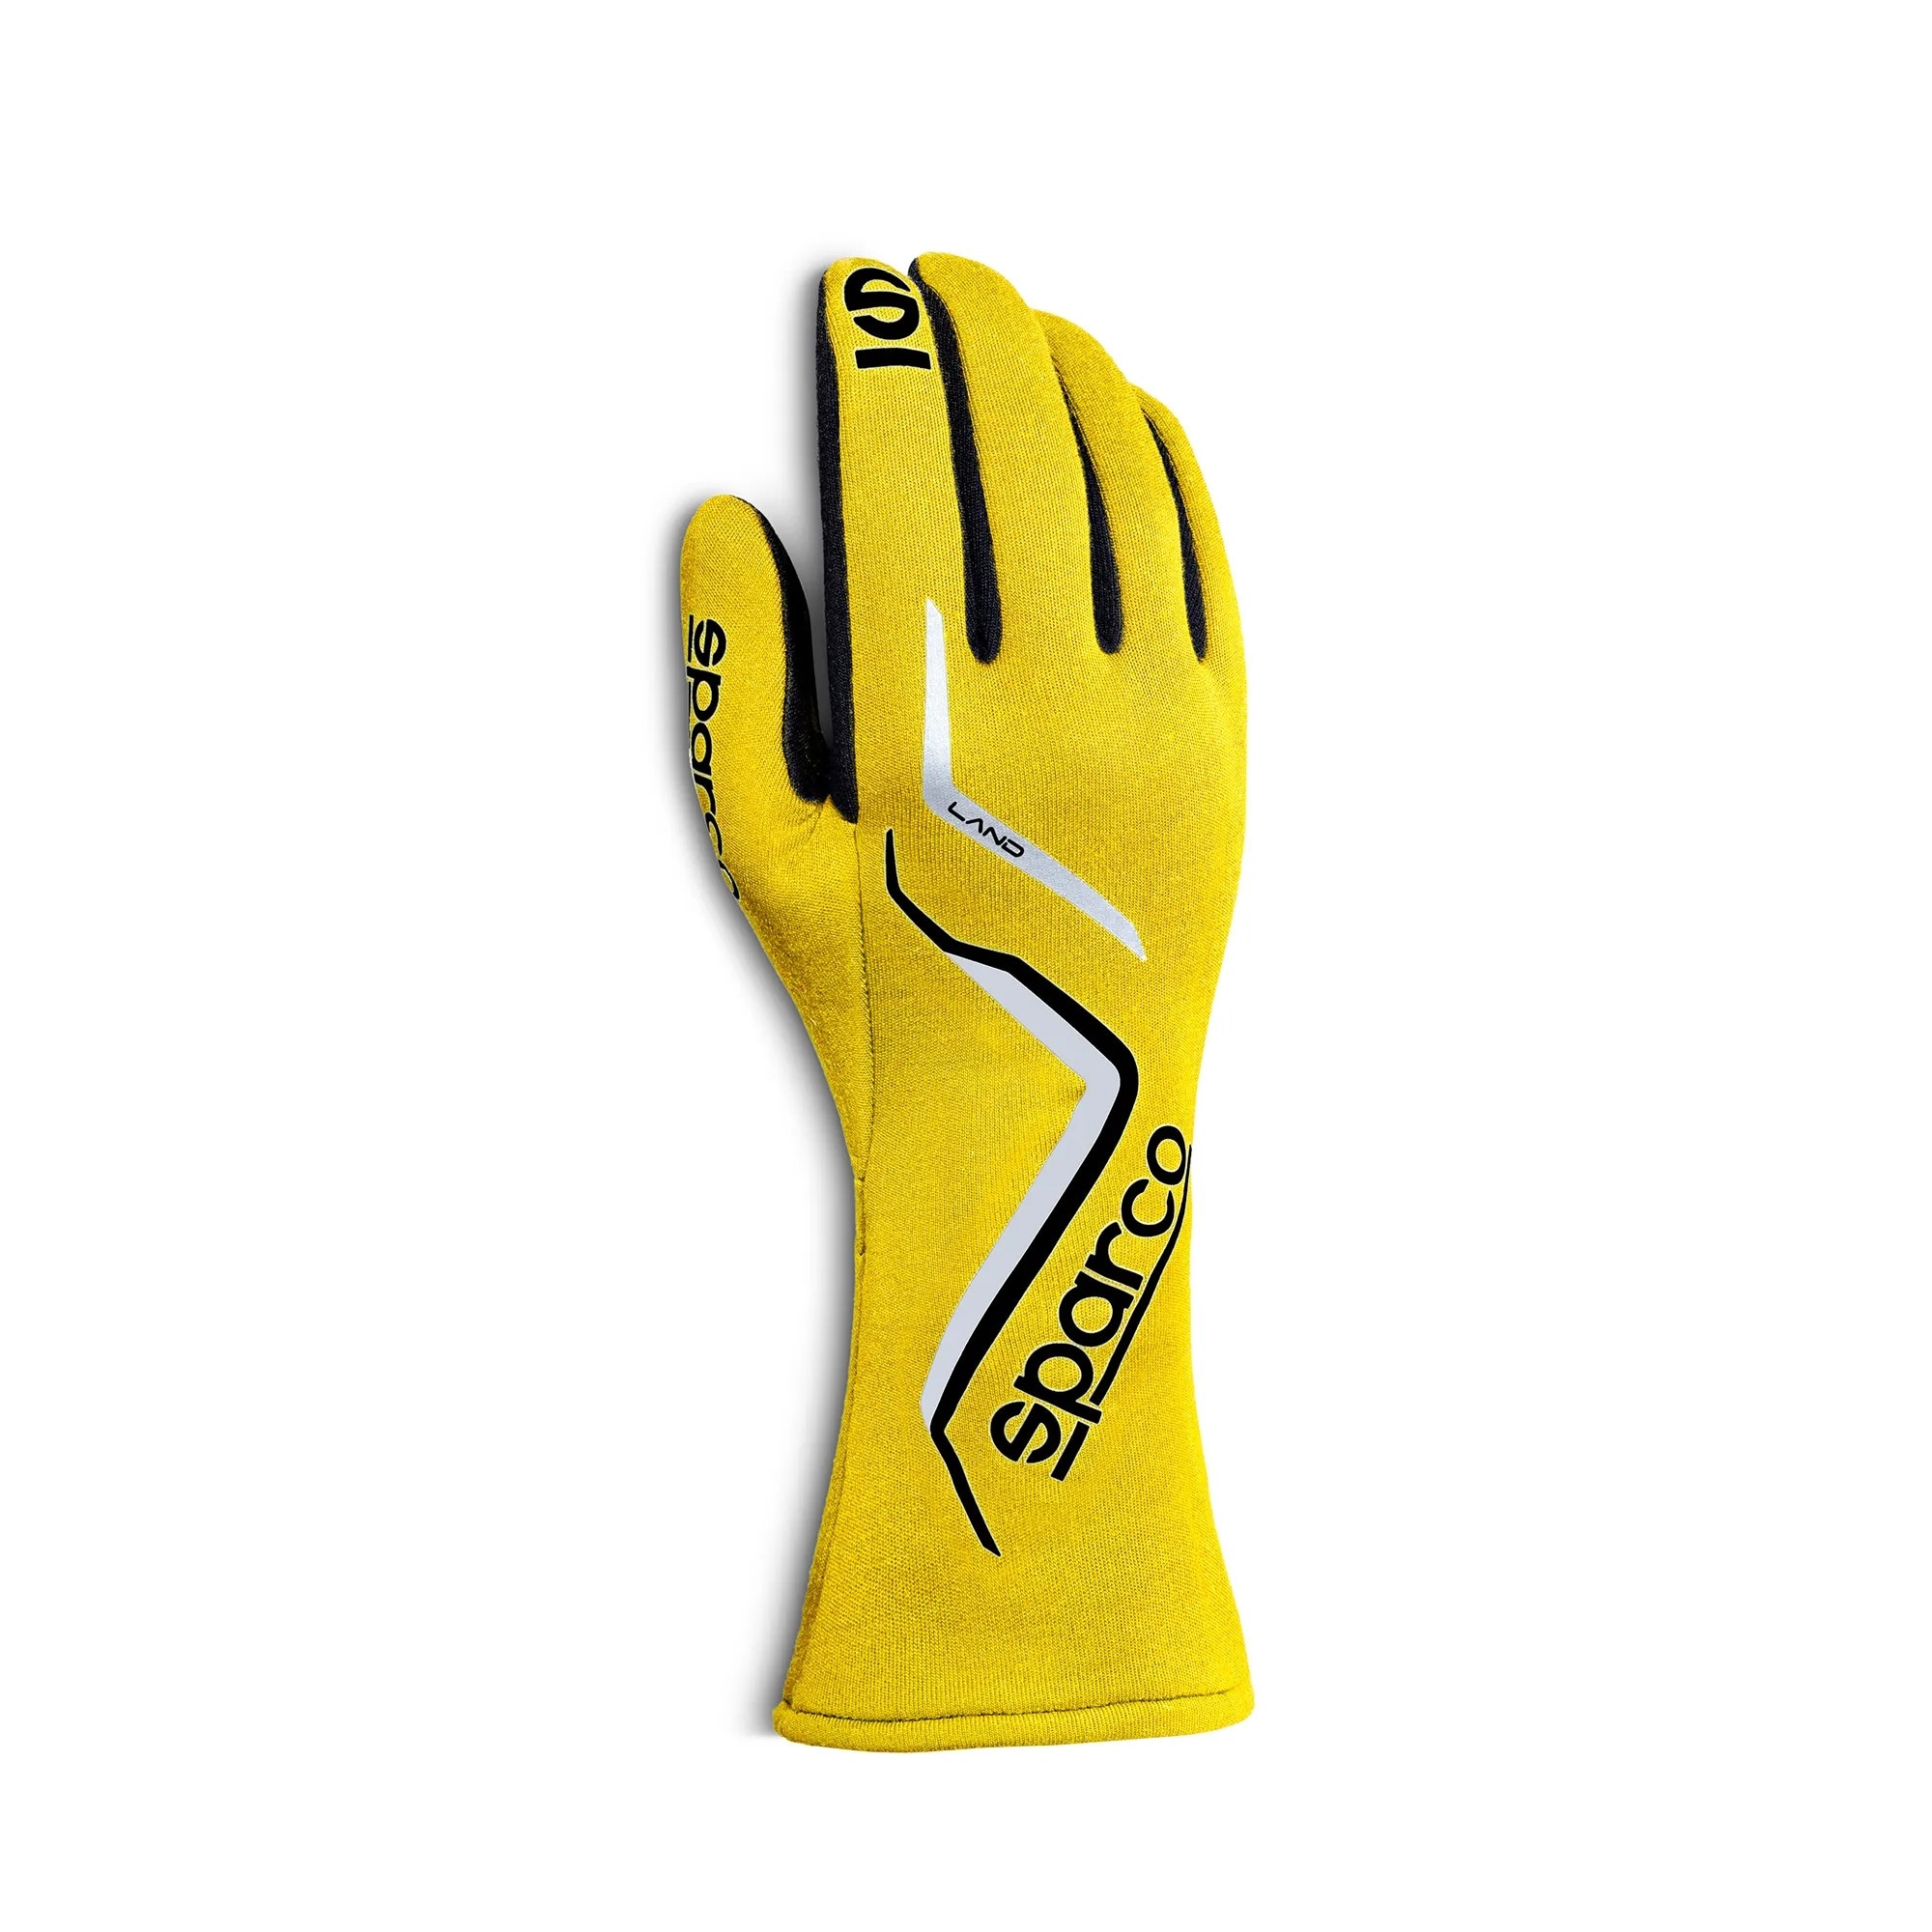 Gloves Sparco Land Yellow